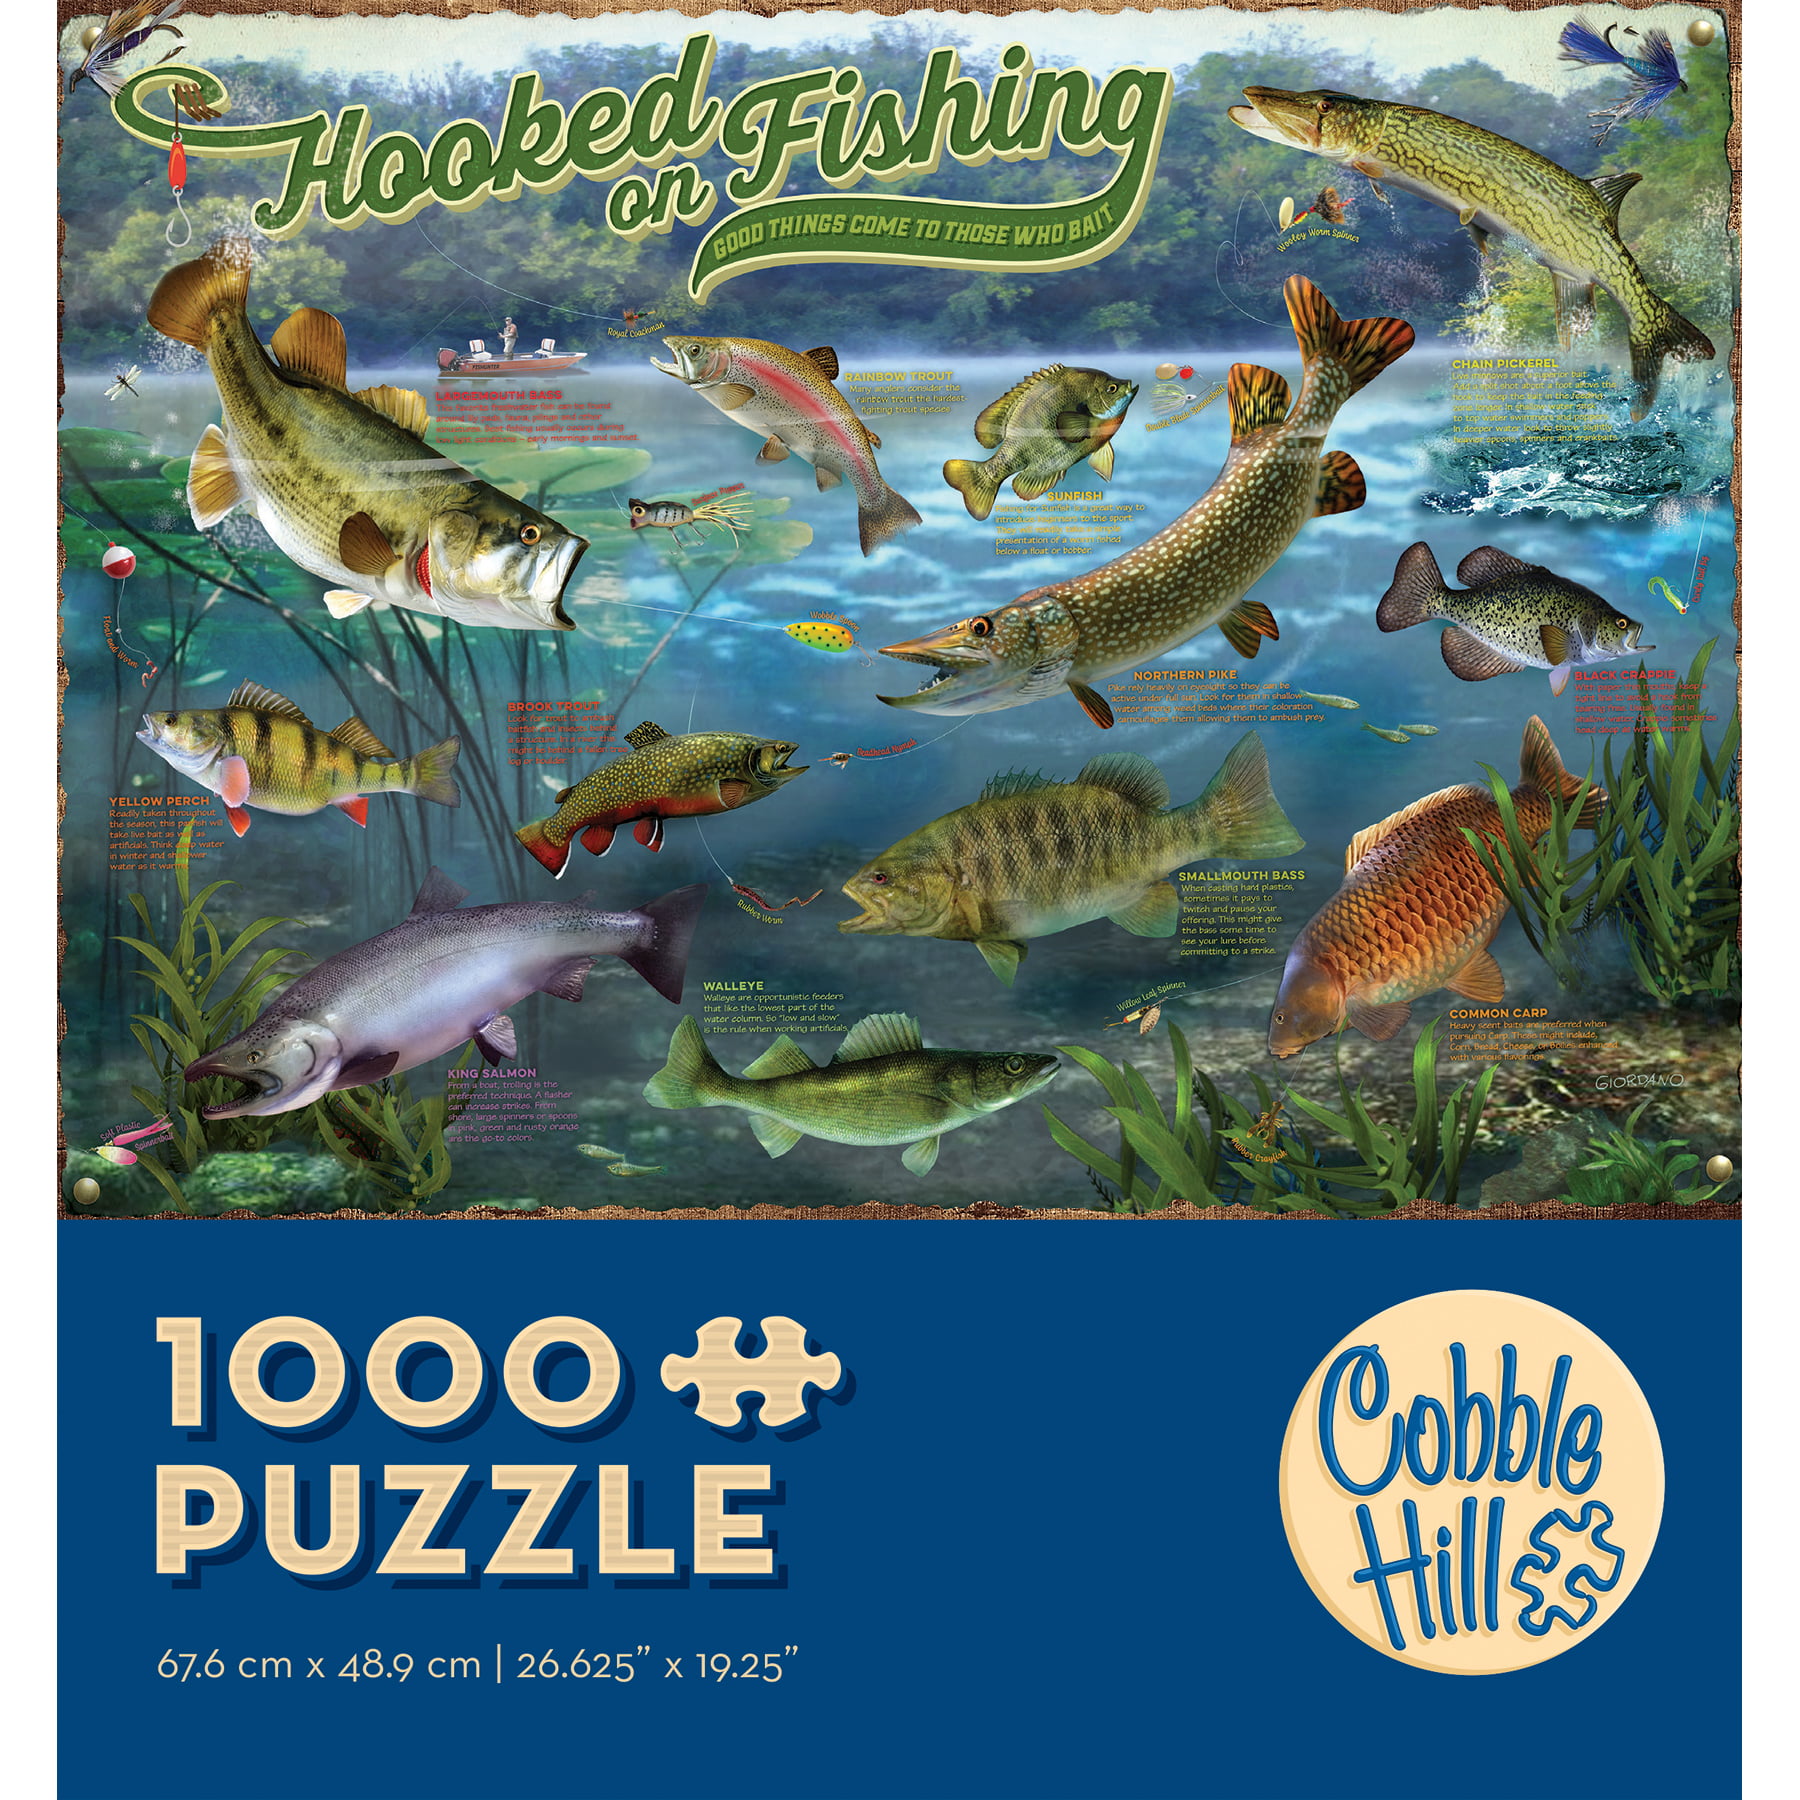 Cobble Hill 1,000 piece puzzle - Hooked on Fishing - small box takes up  less space